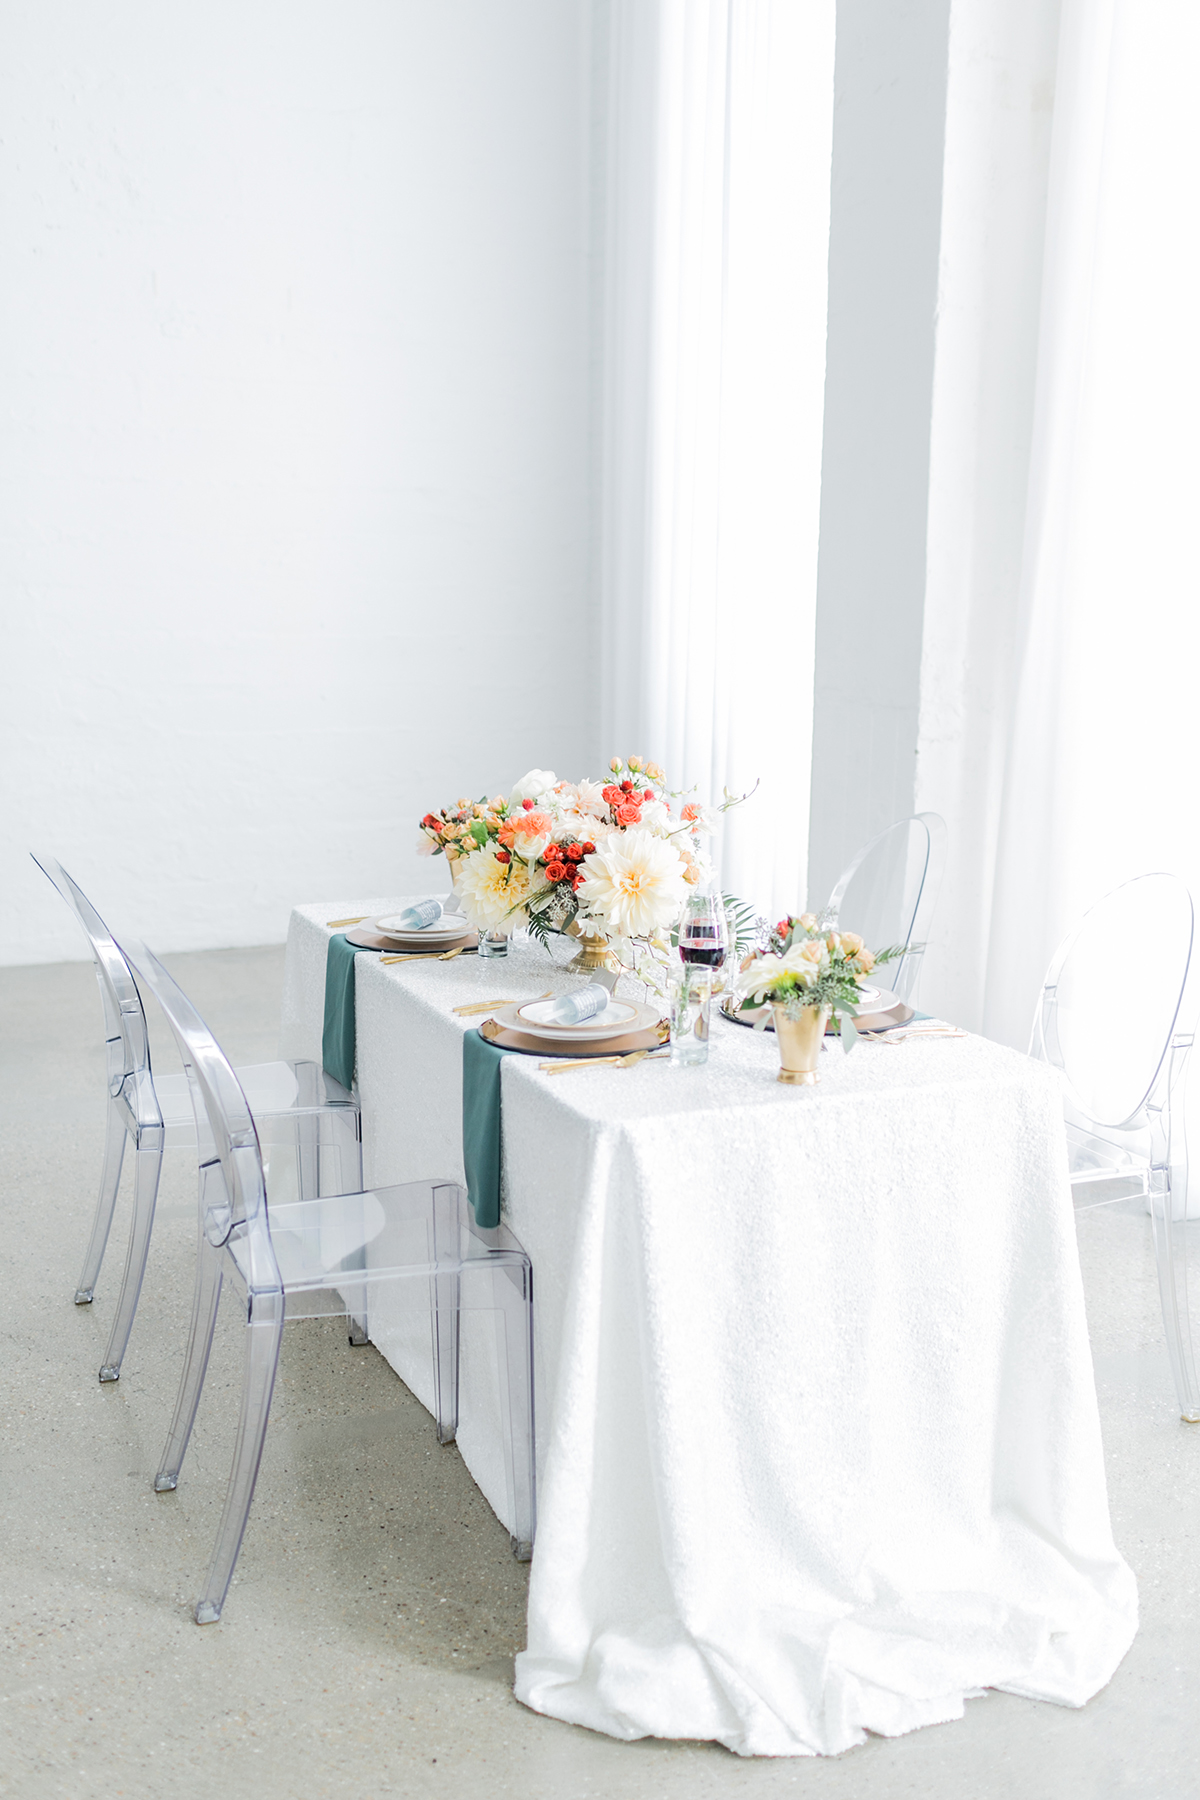 Wedding Table with White Sequin Tablecloth